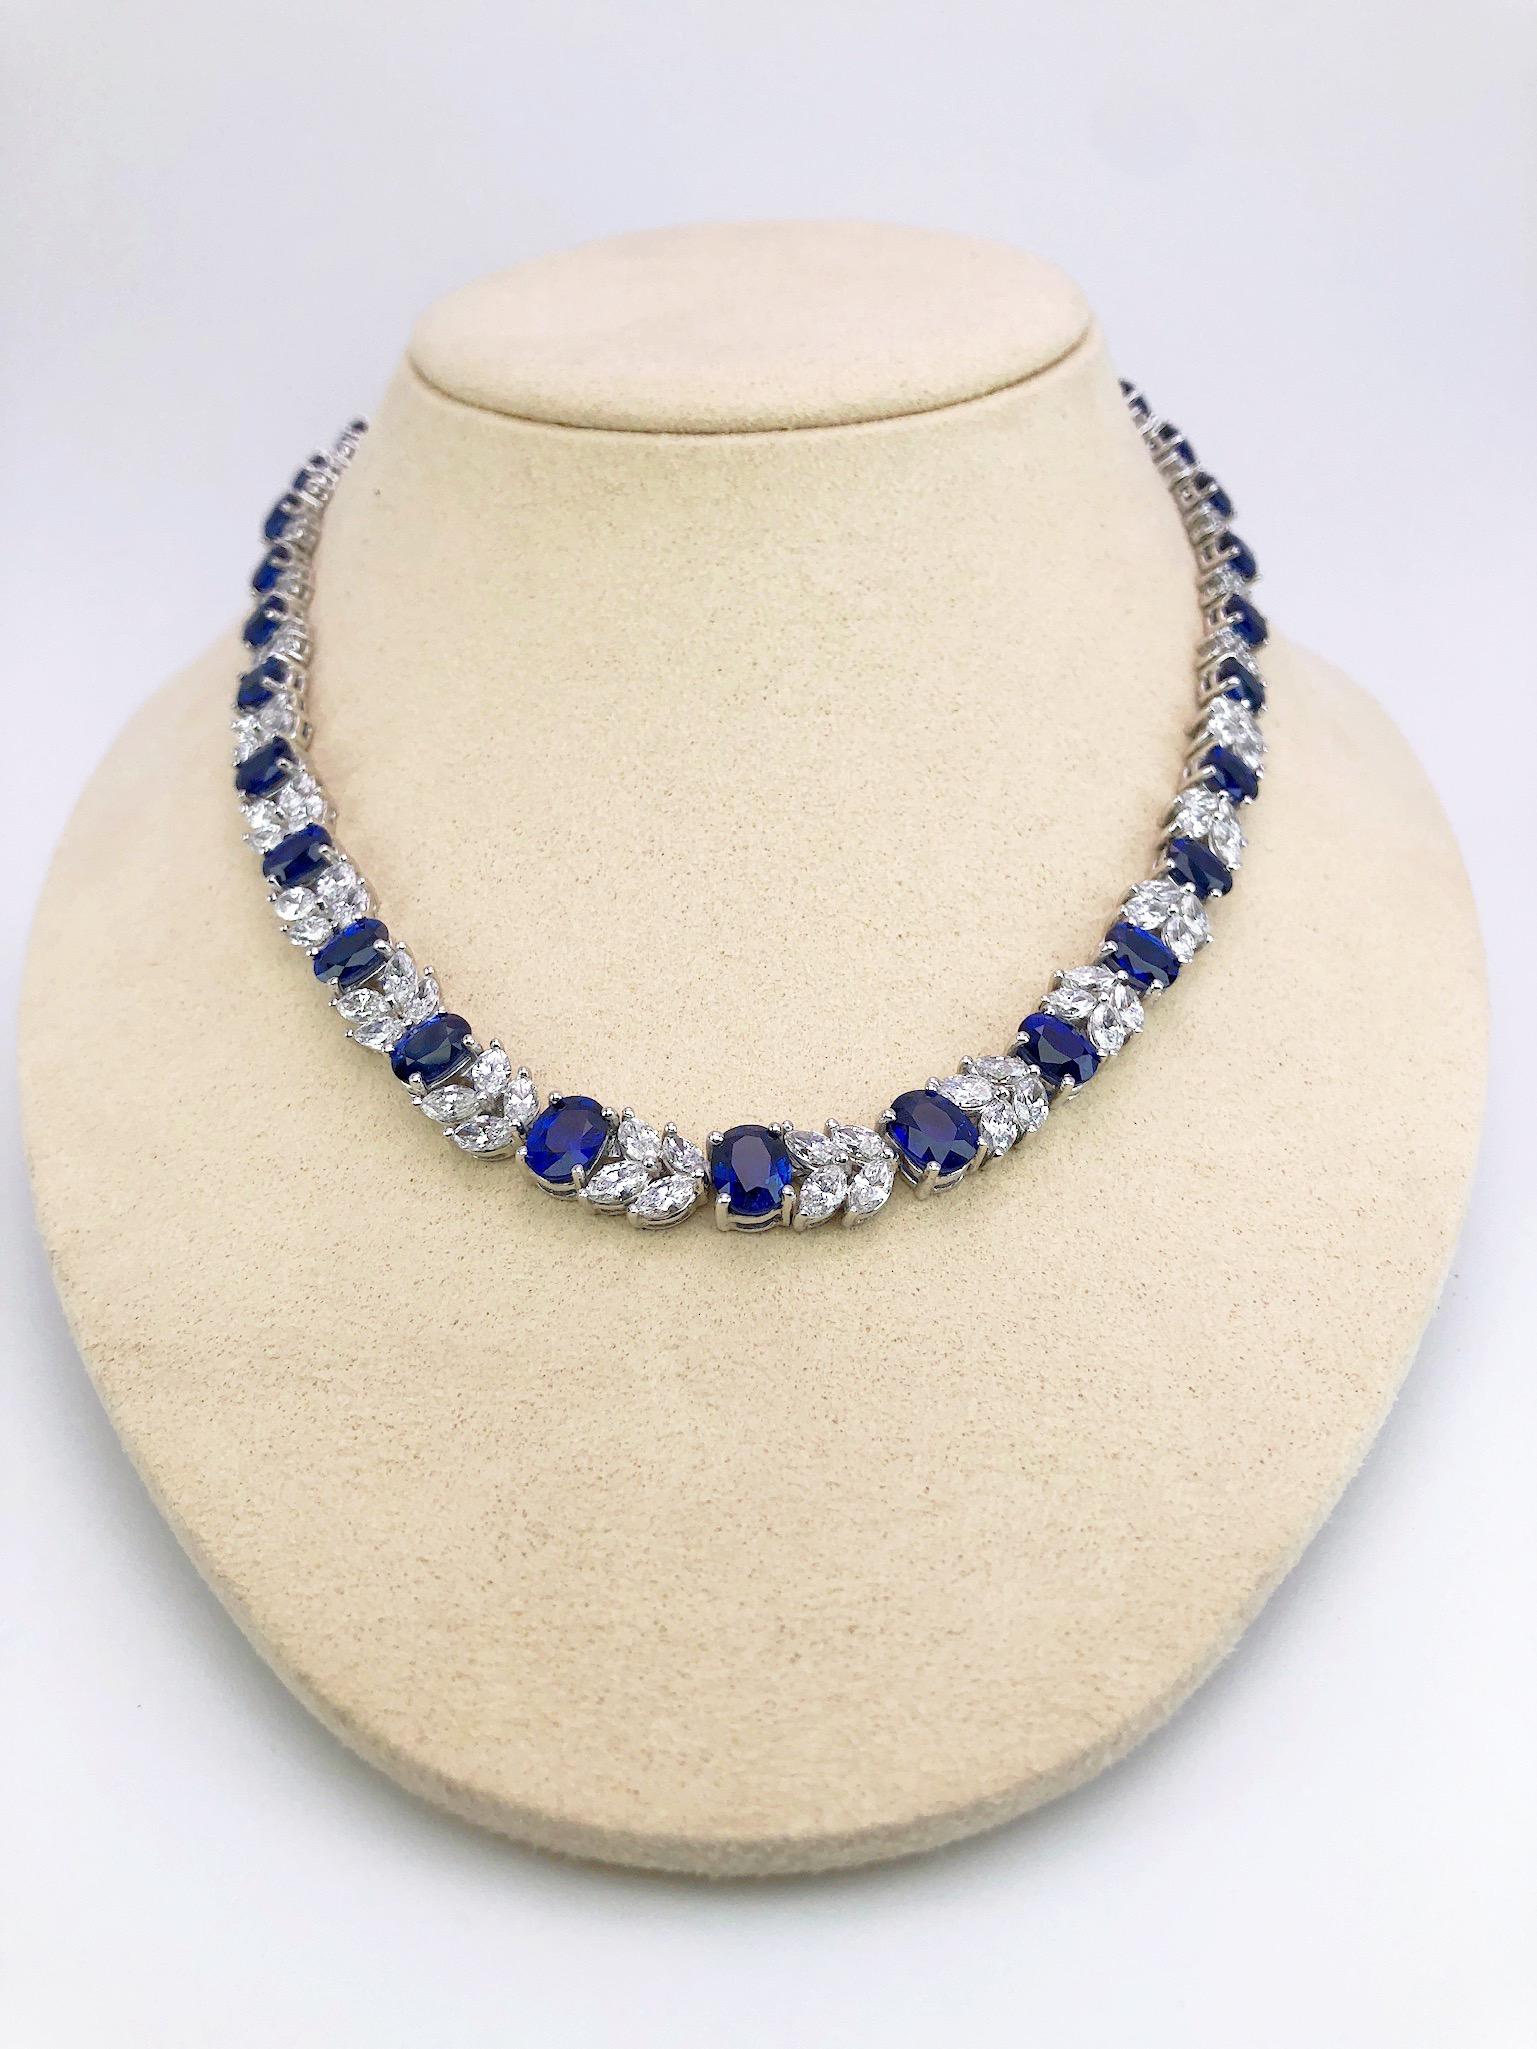 This platinum wreath necklace is designed with 33 oval blue sapphires. The sapphires alternate with a pattern of marquise and round diamonds. Total length 15.5